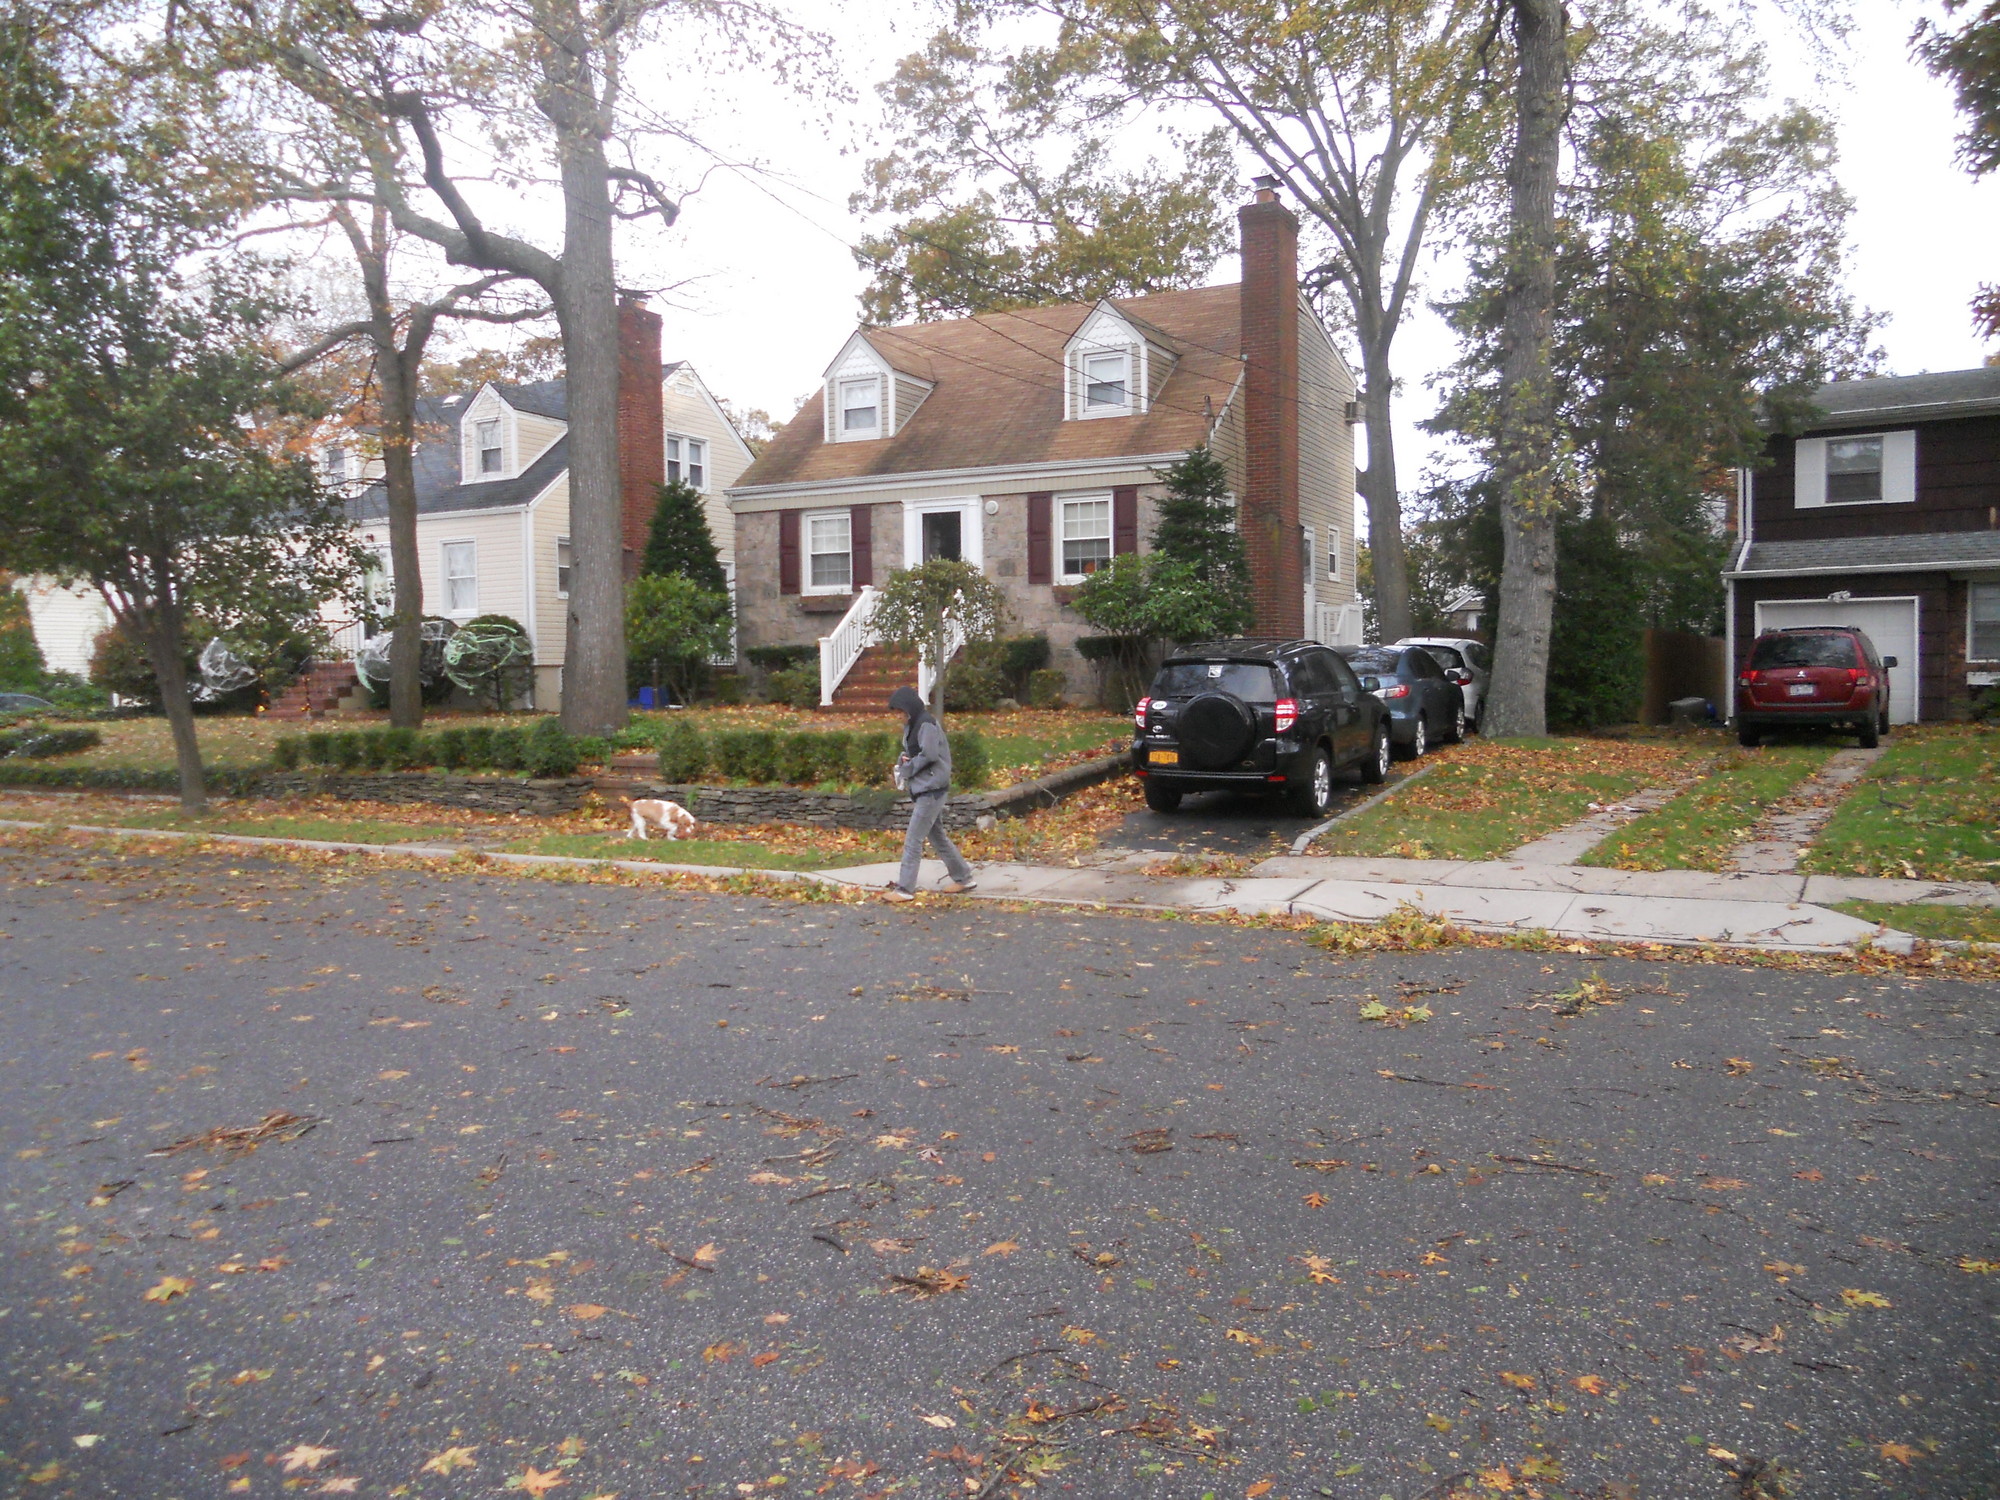 A view of Alan and Barbara Mazza's home on East Oxford Street after Hurricane Sandy in 2012 shows no flooding on his street.